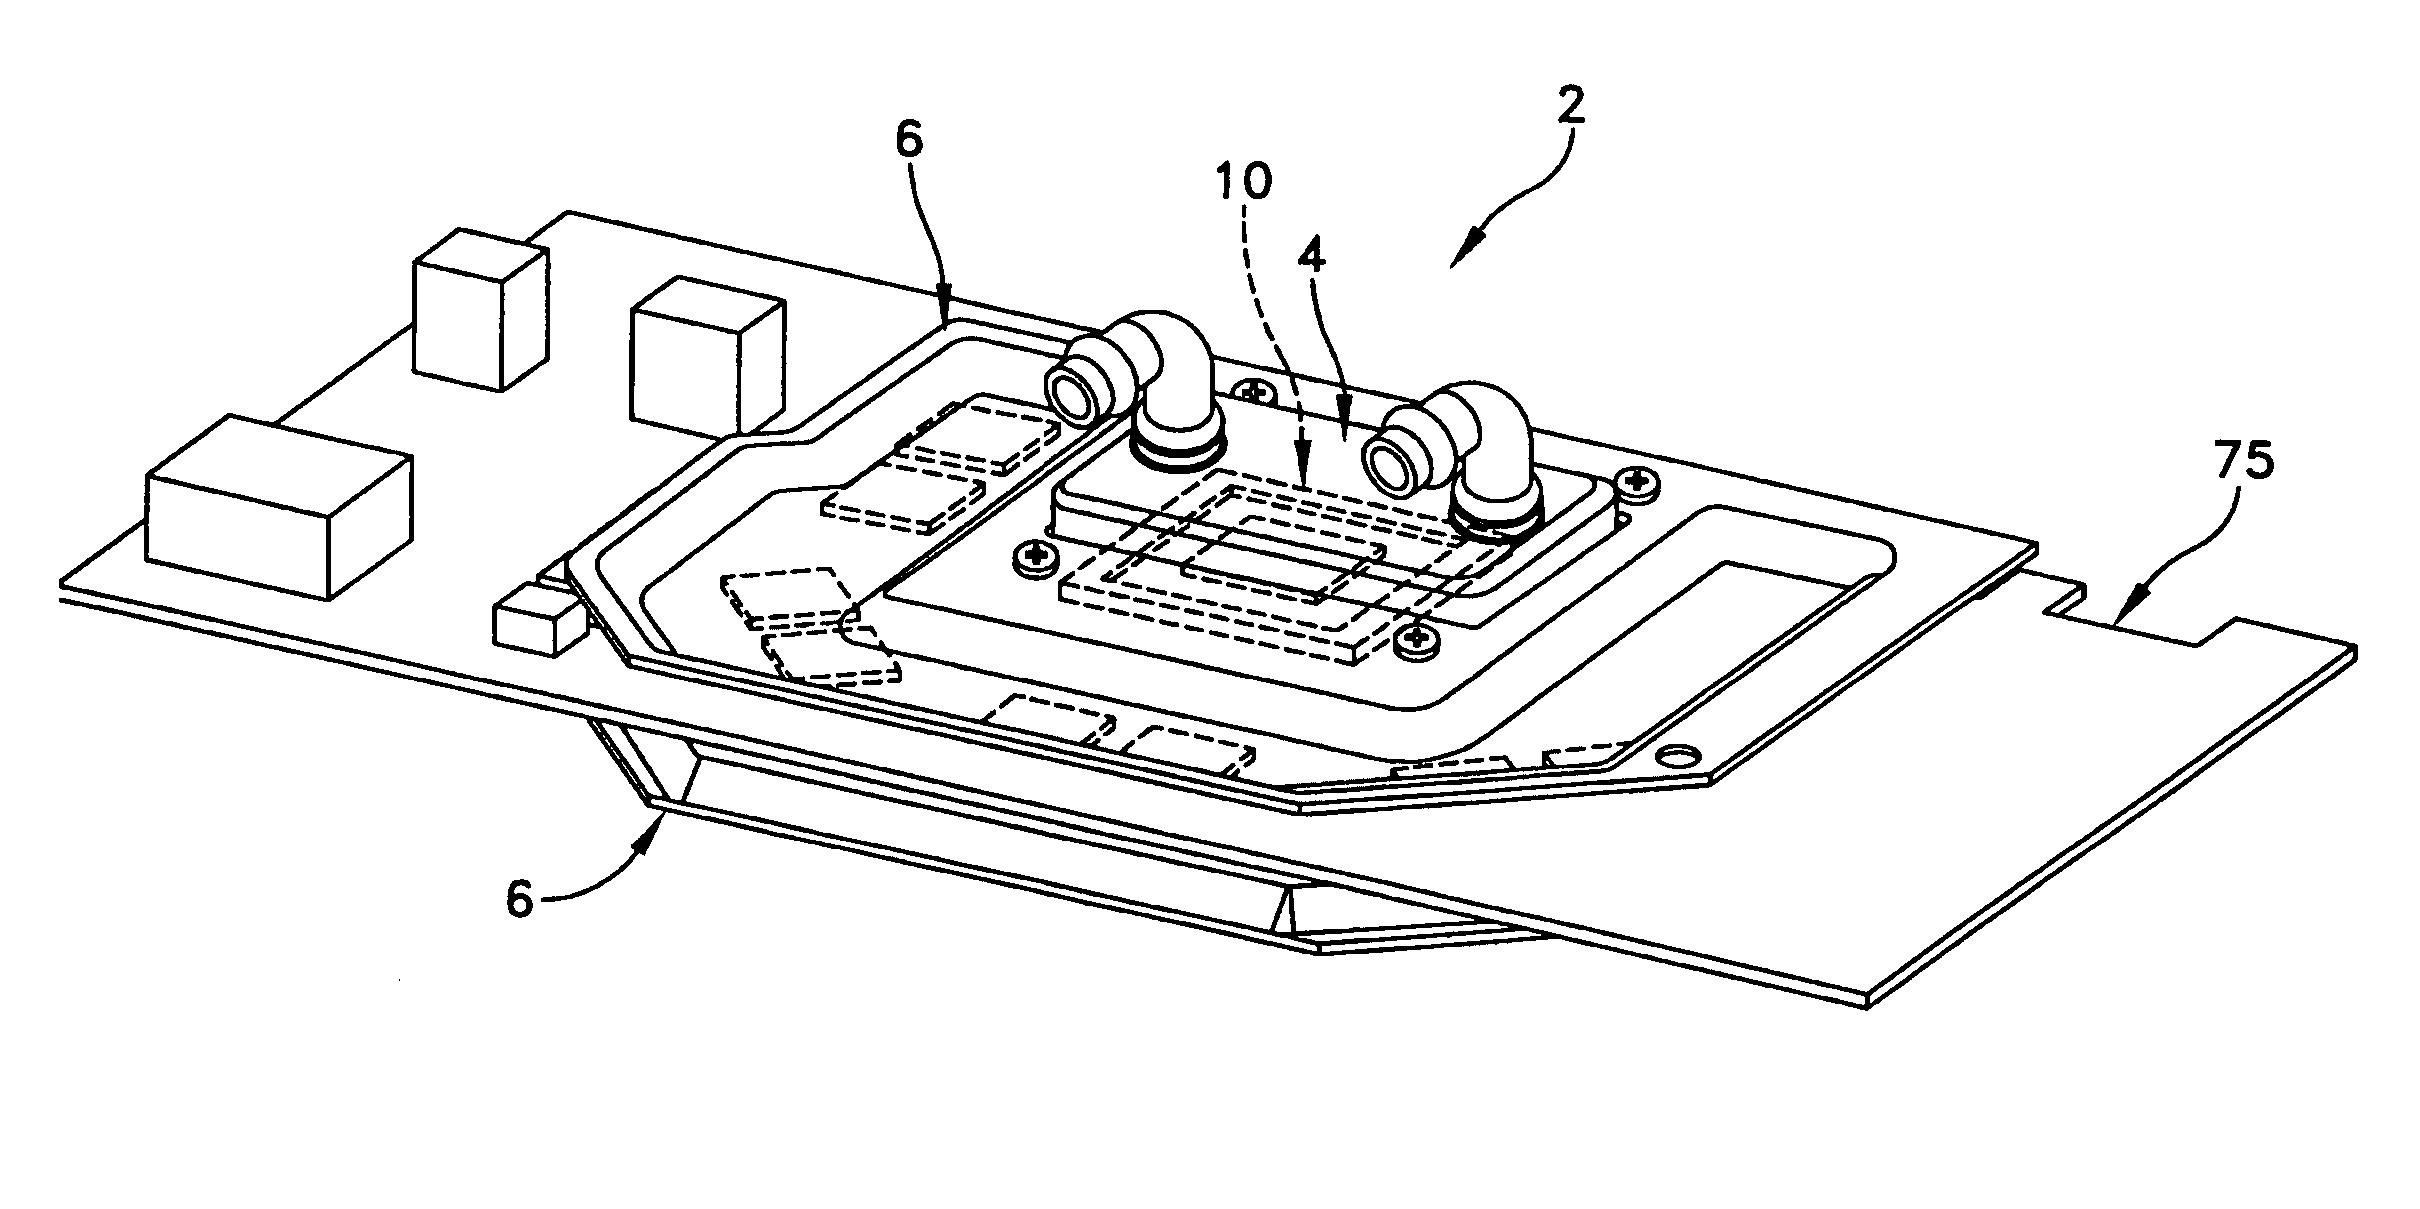 Liquid cooled heat sink with cold plate retention mechanism